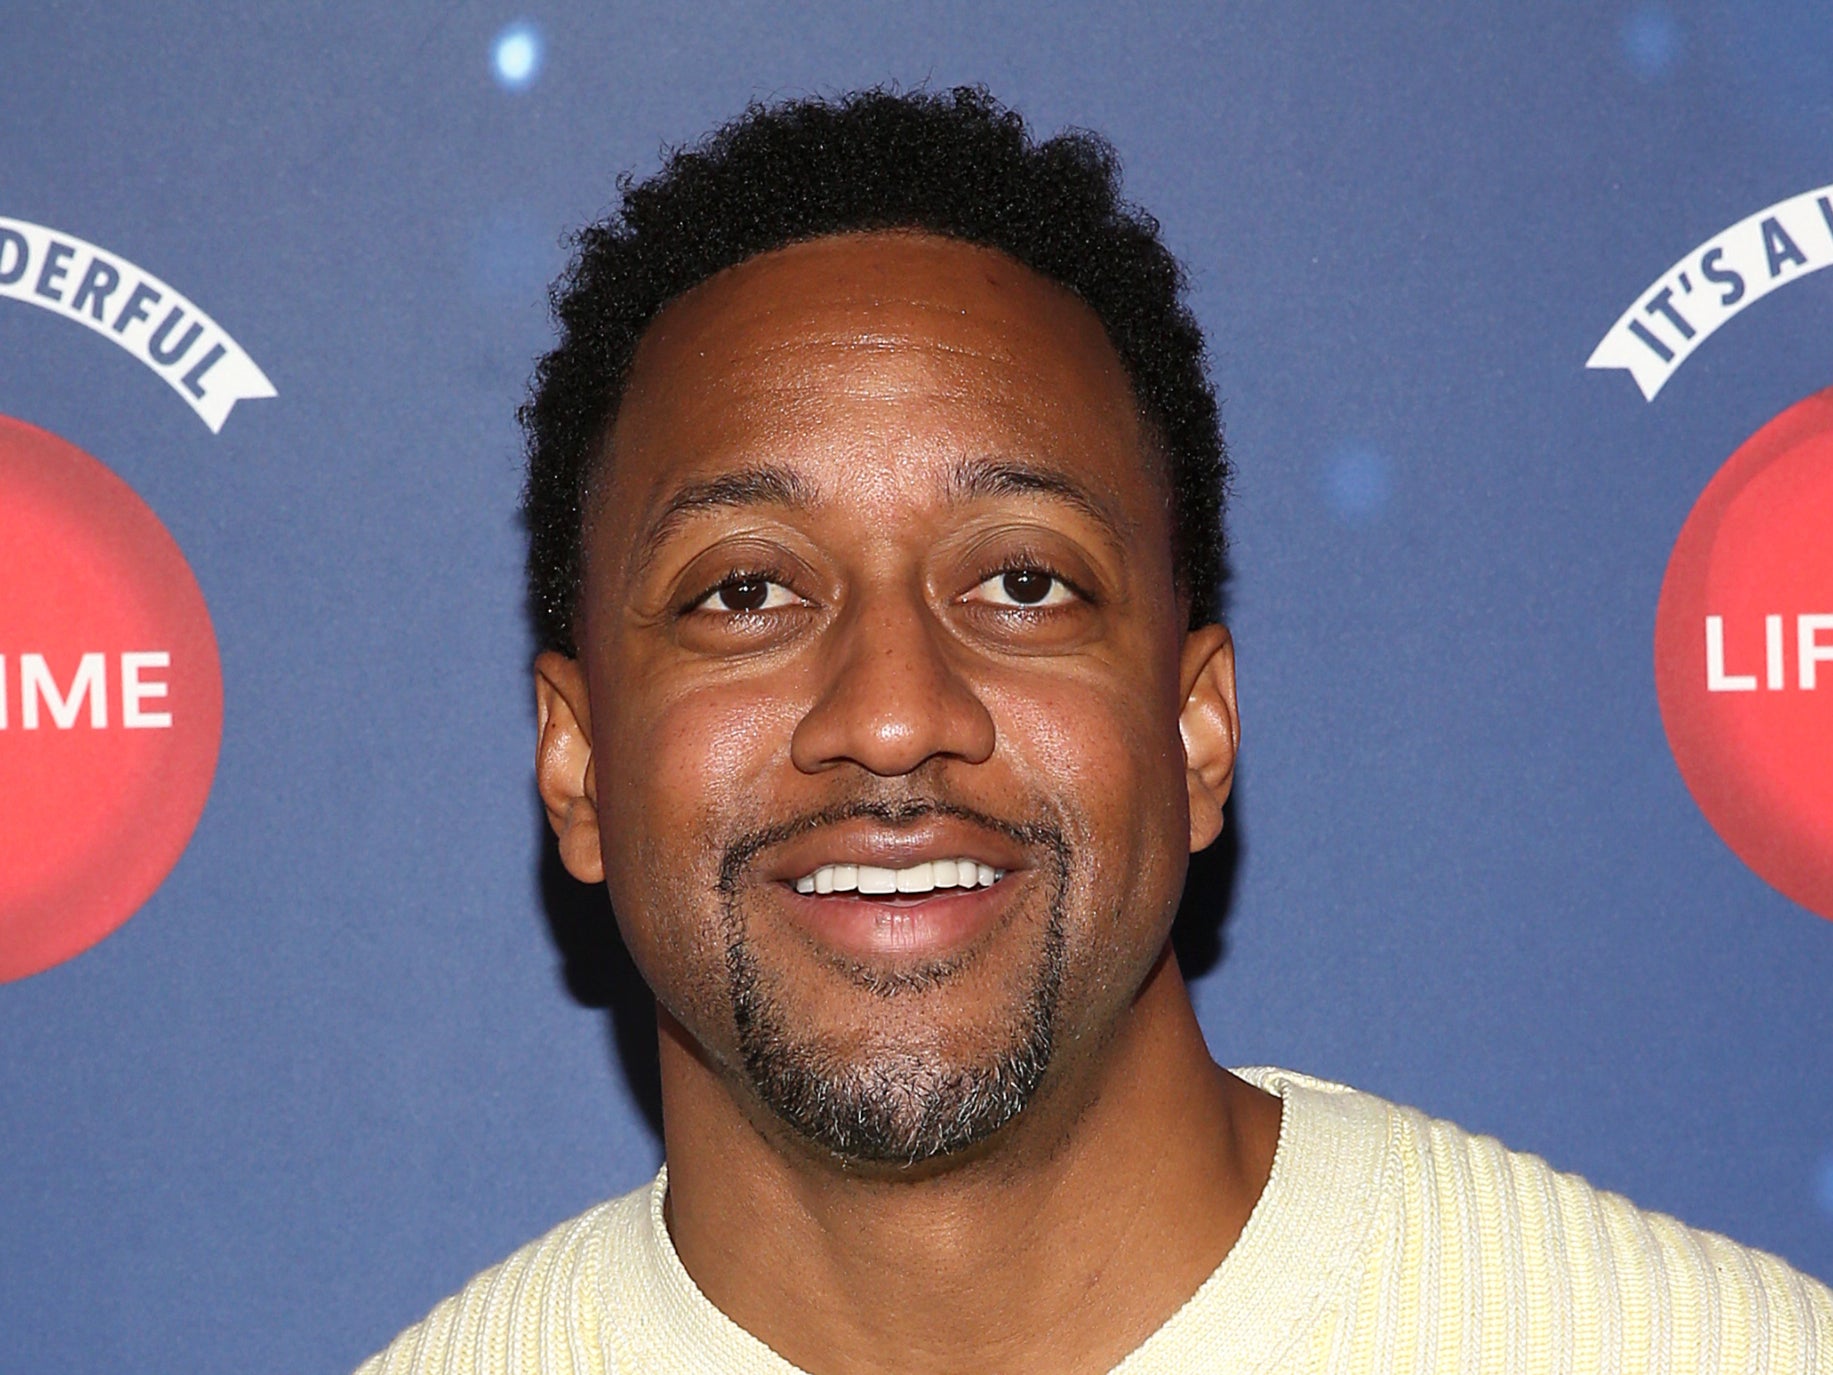 Jaleel White, the actor best known for playing Steve Urkel on the 1990s sitcom “Family Matters”, launched the new brand on 20 April